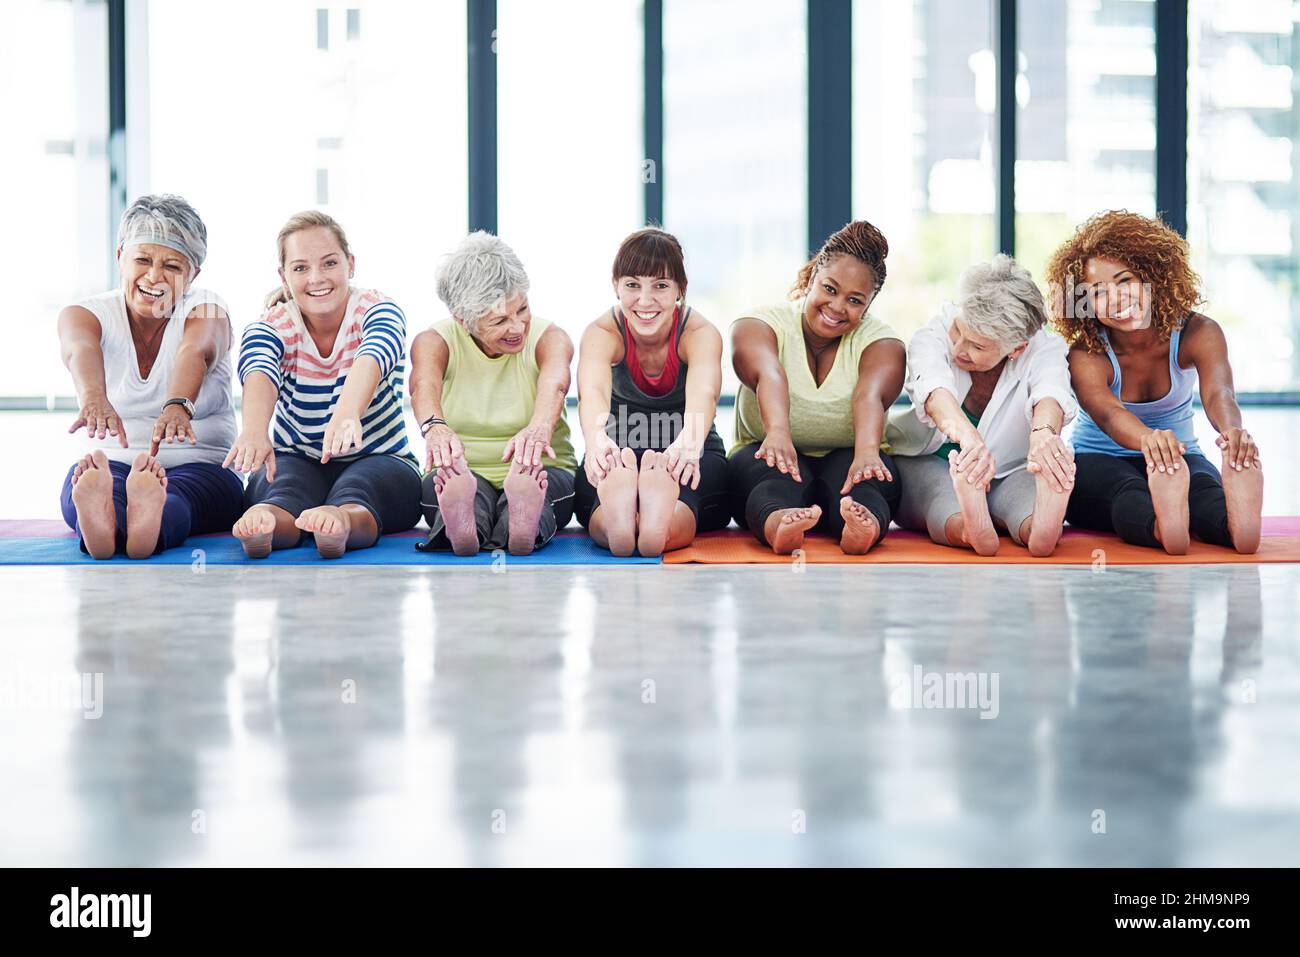 We never forget to warmup. Shot of a group of women warming up indoors. Stock Photo